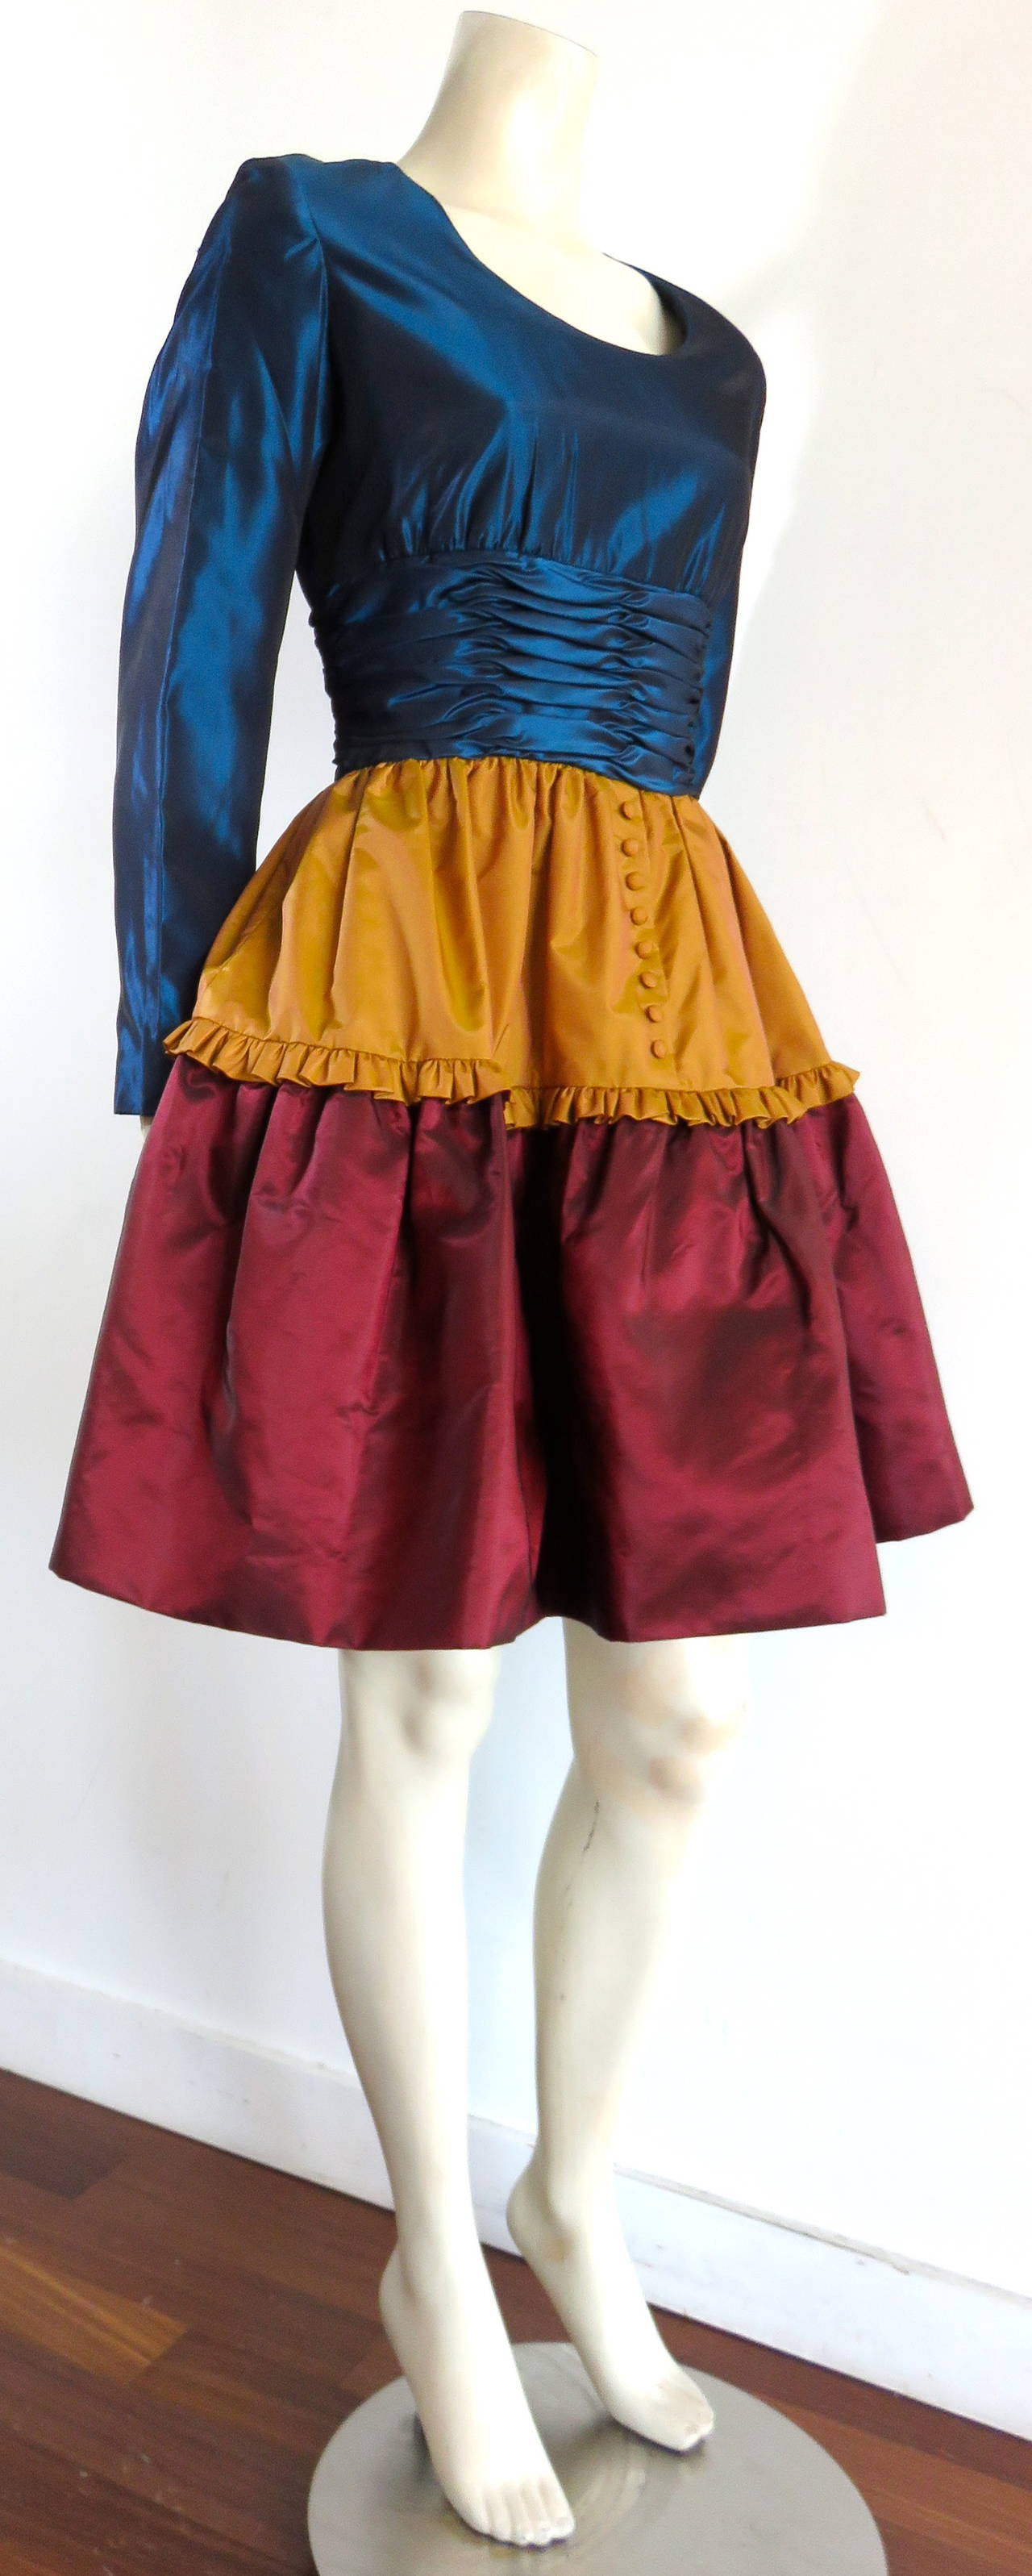 Never worn, 1980's OSCAR DE LA RENTA STUDIO Taffeta cocktail dress.

This lovely dress features shiny, taffeta fabrication in dark teal blue, matte bronze, and dark cranberry red.

The top torso, bodice features pleated construction at the